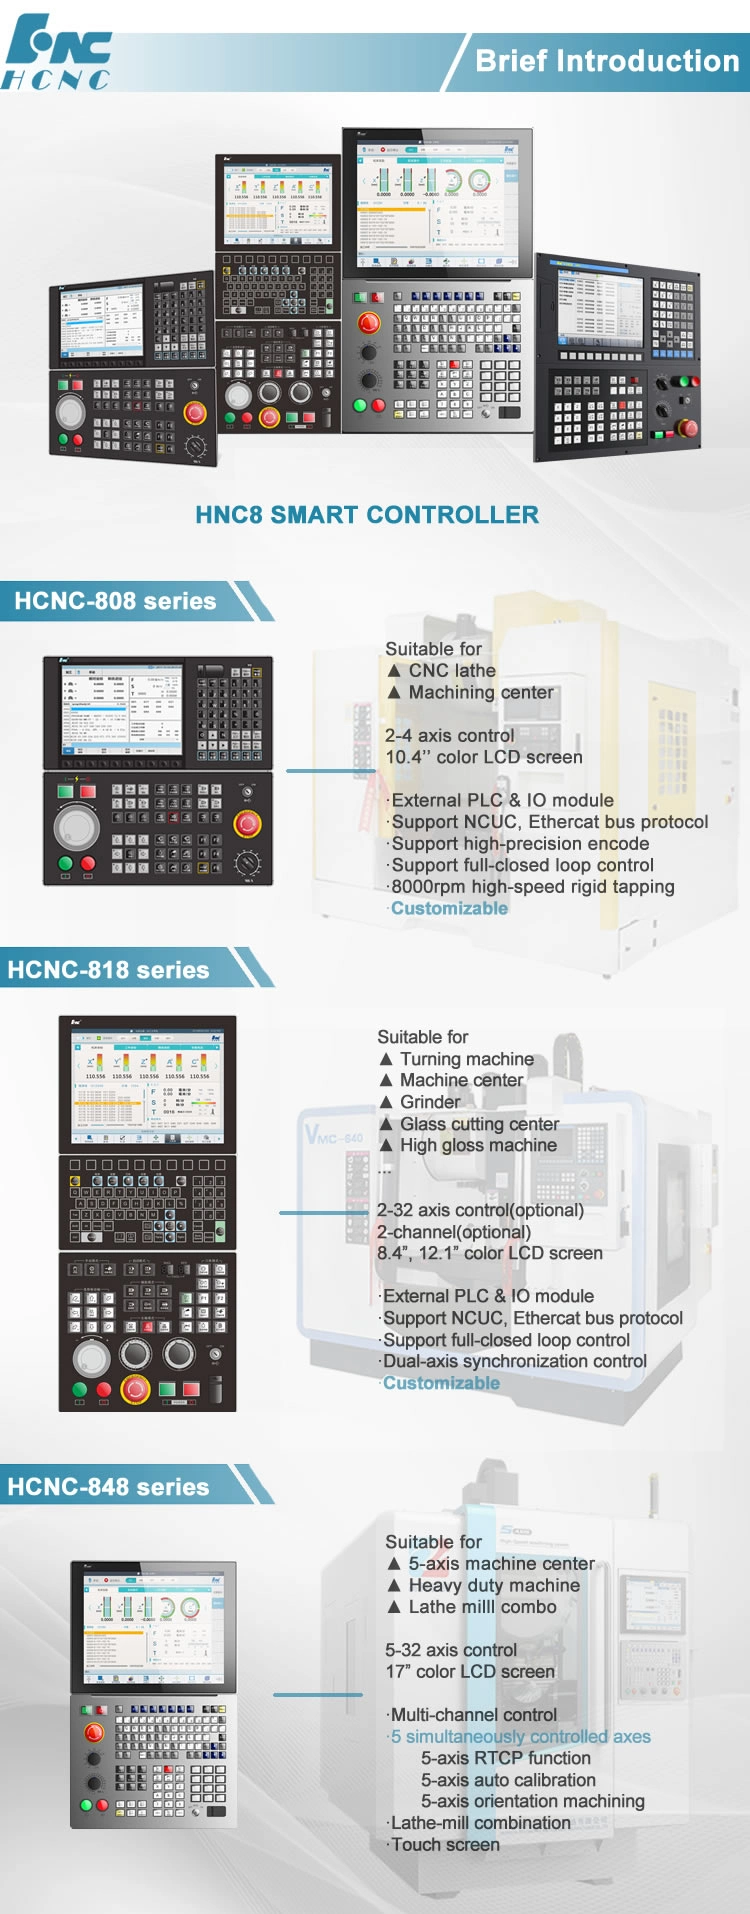 Hnc 8 Series 2 3 4 5 Axis CNC Controller for CNC Milling Machine and CNC Lathe and Grinding Machine